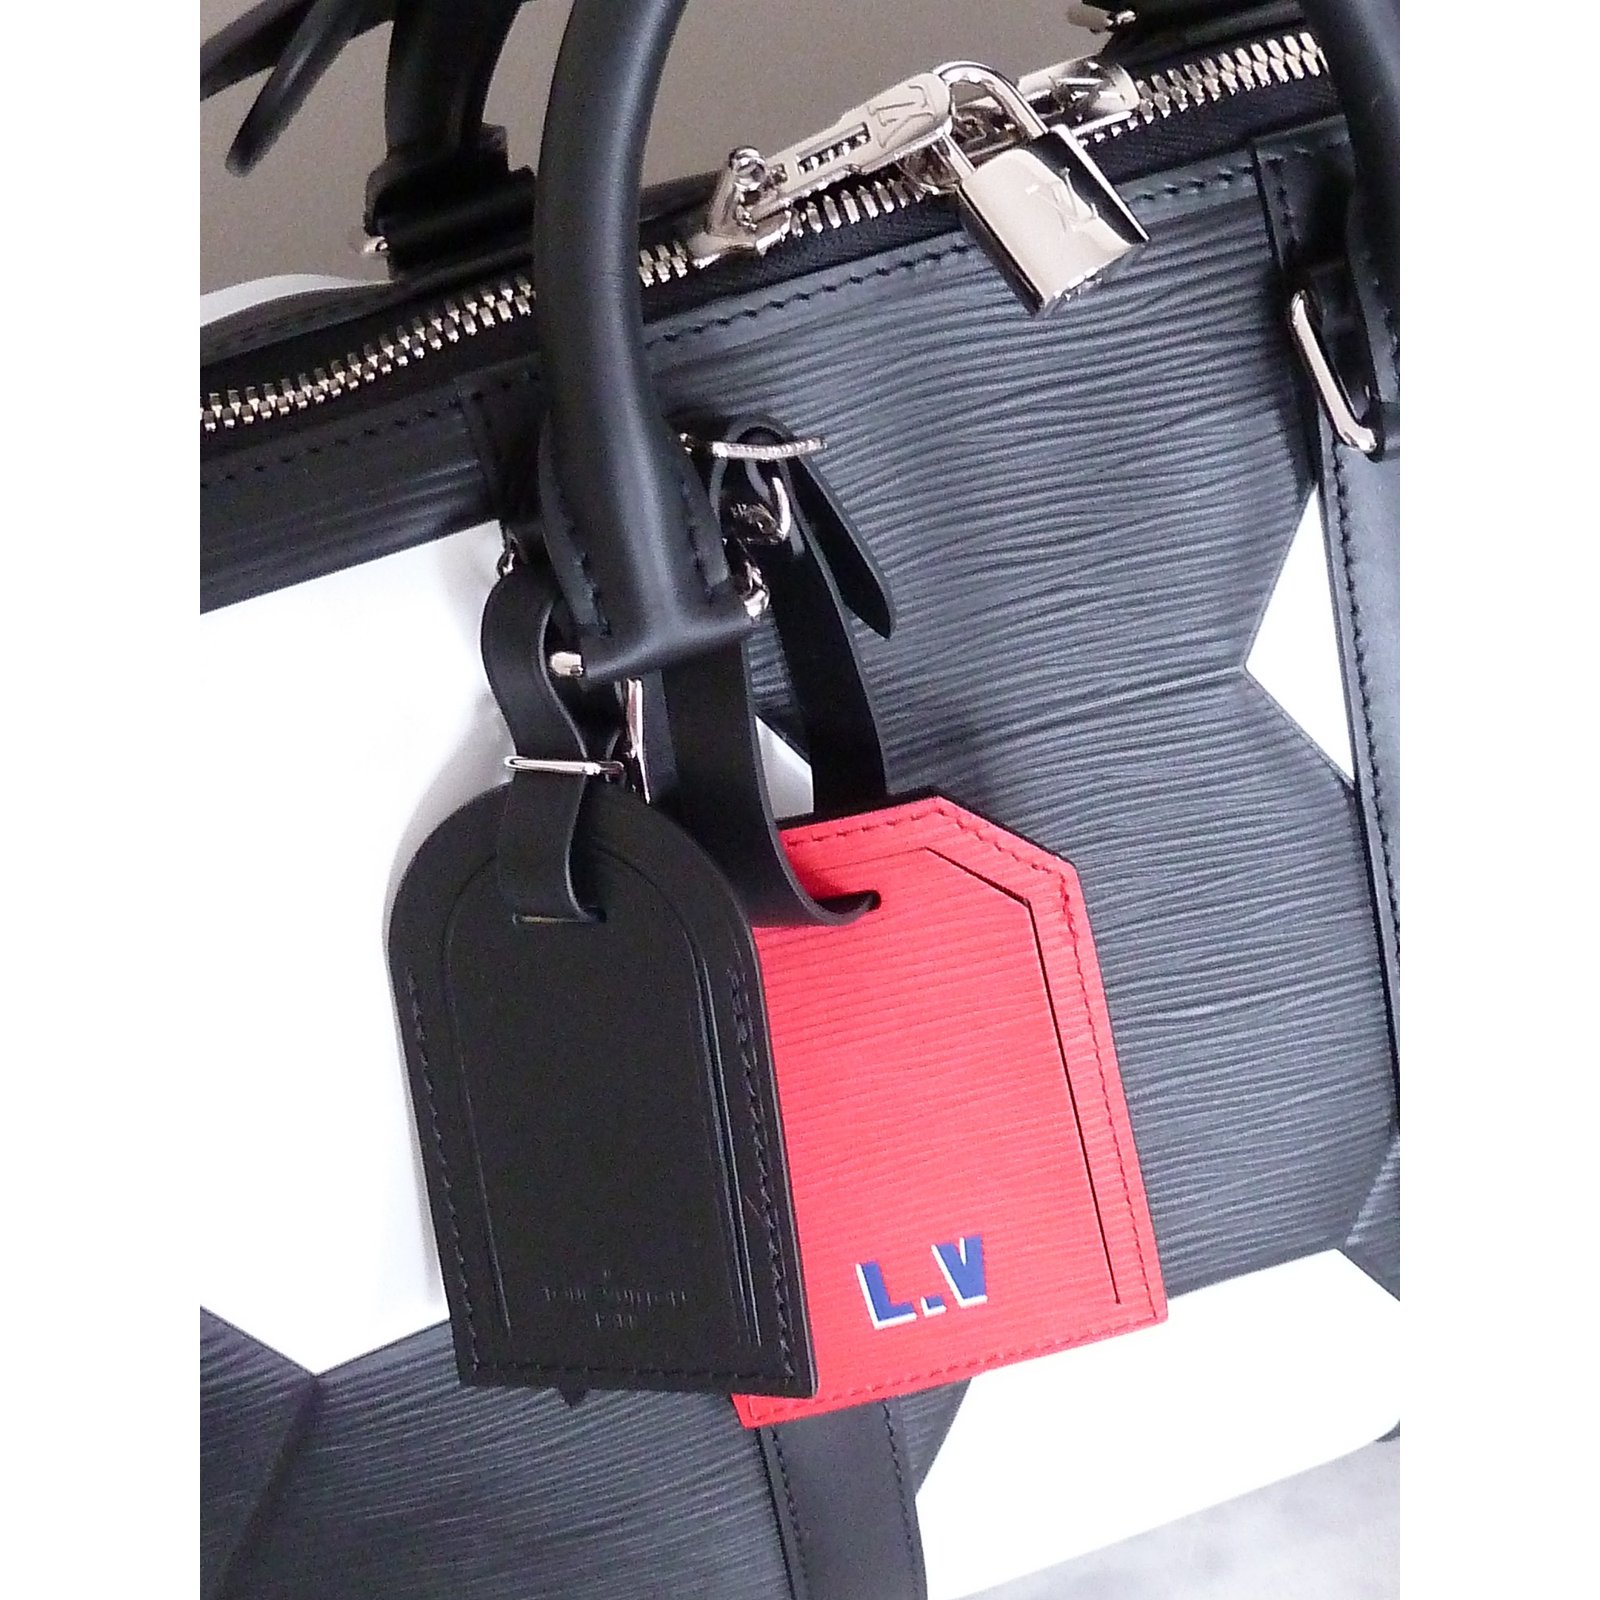 Louis Vuitton | FIFA World Cup Keepall Bandouliere 50 | M52187 by The-Collectory